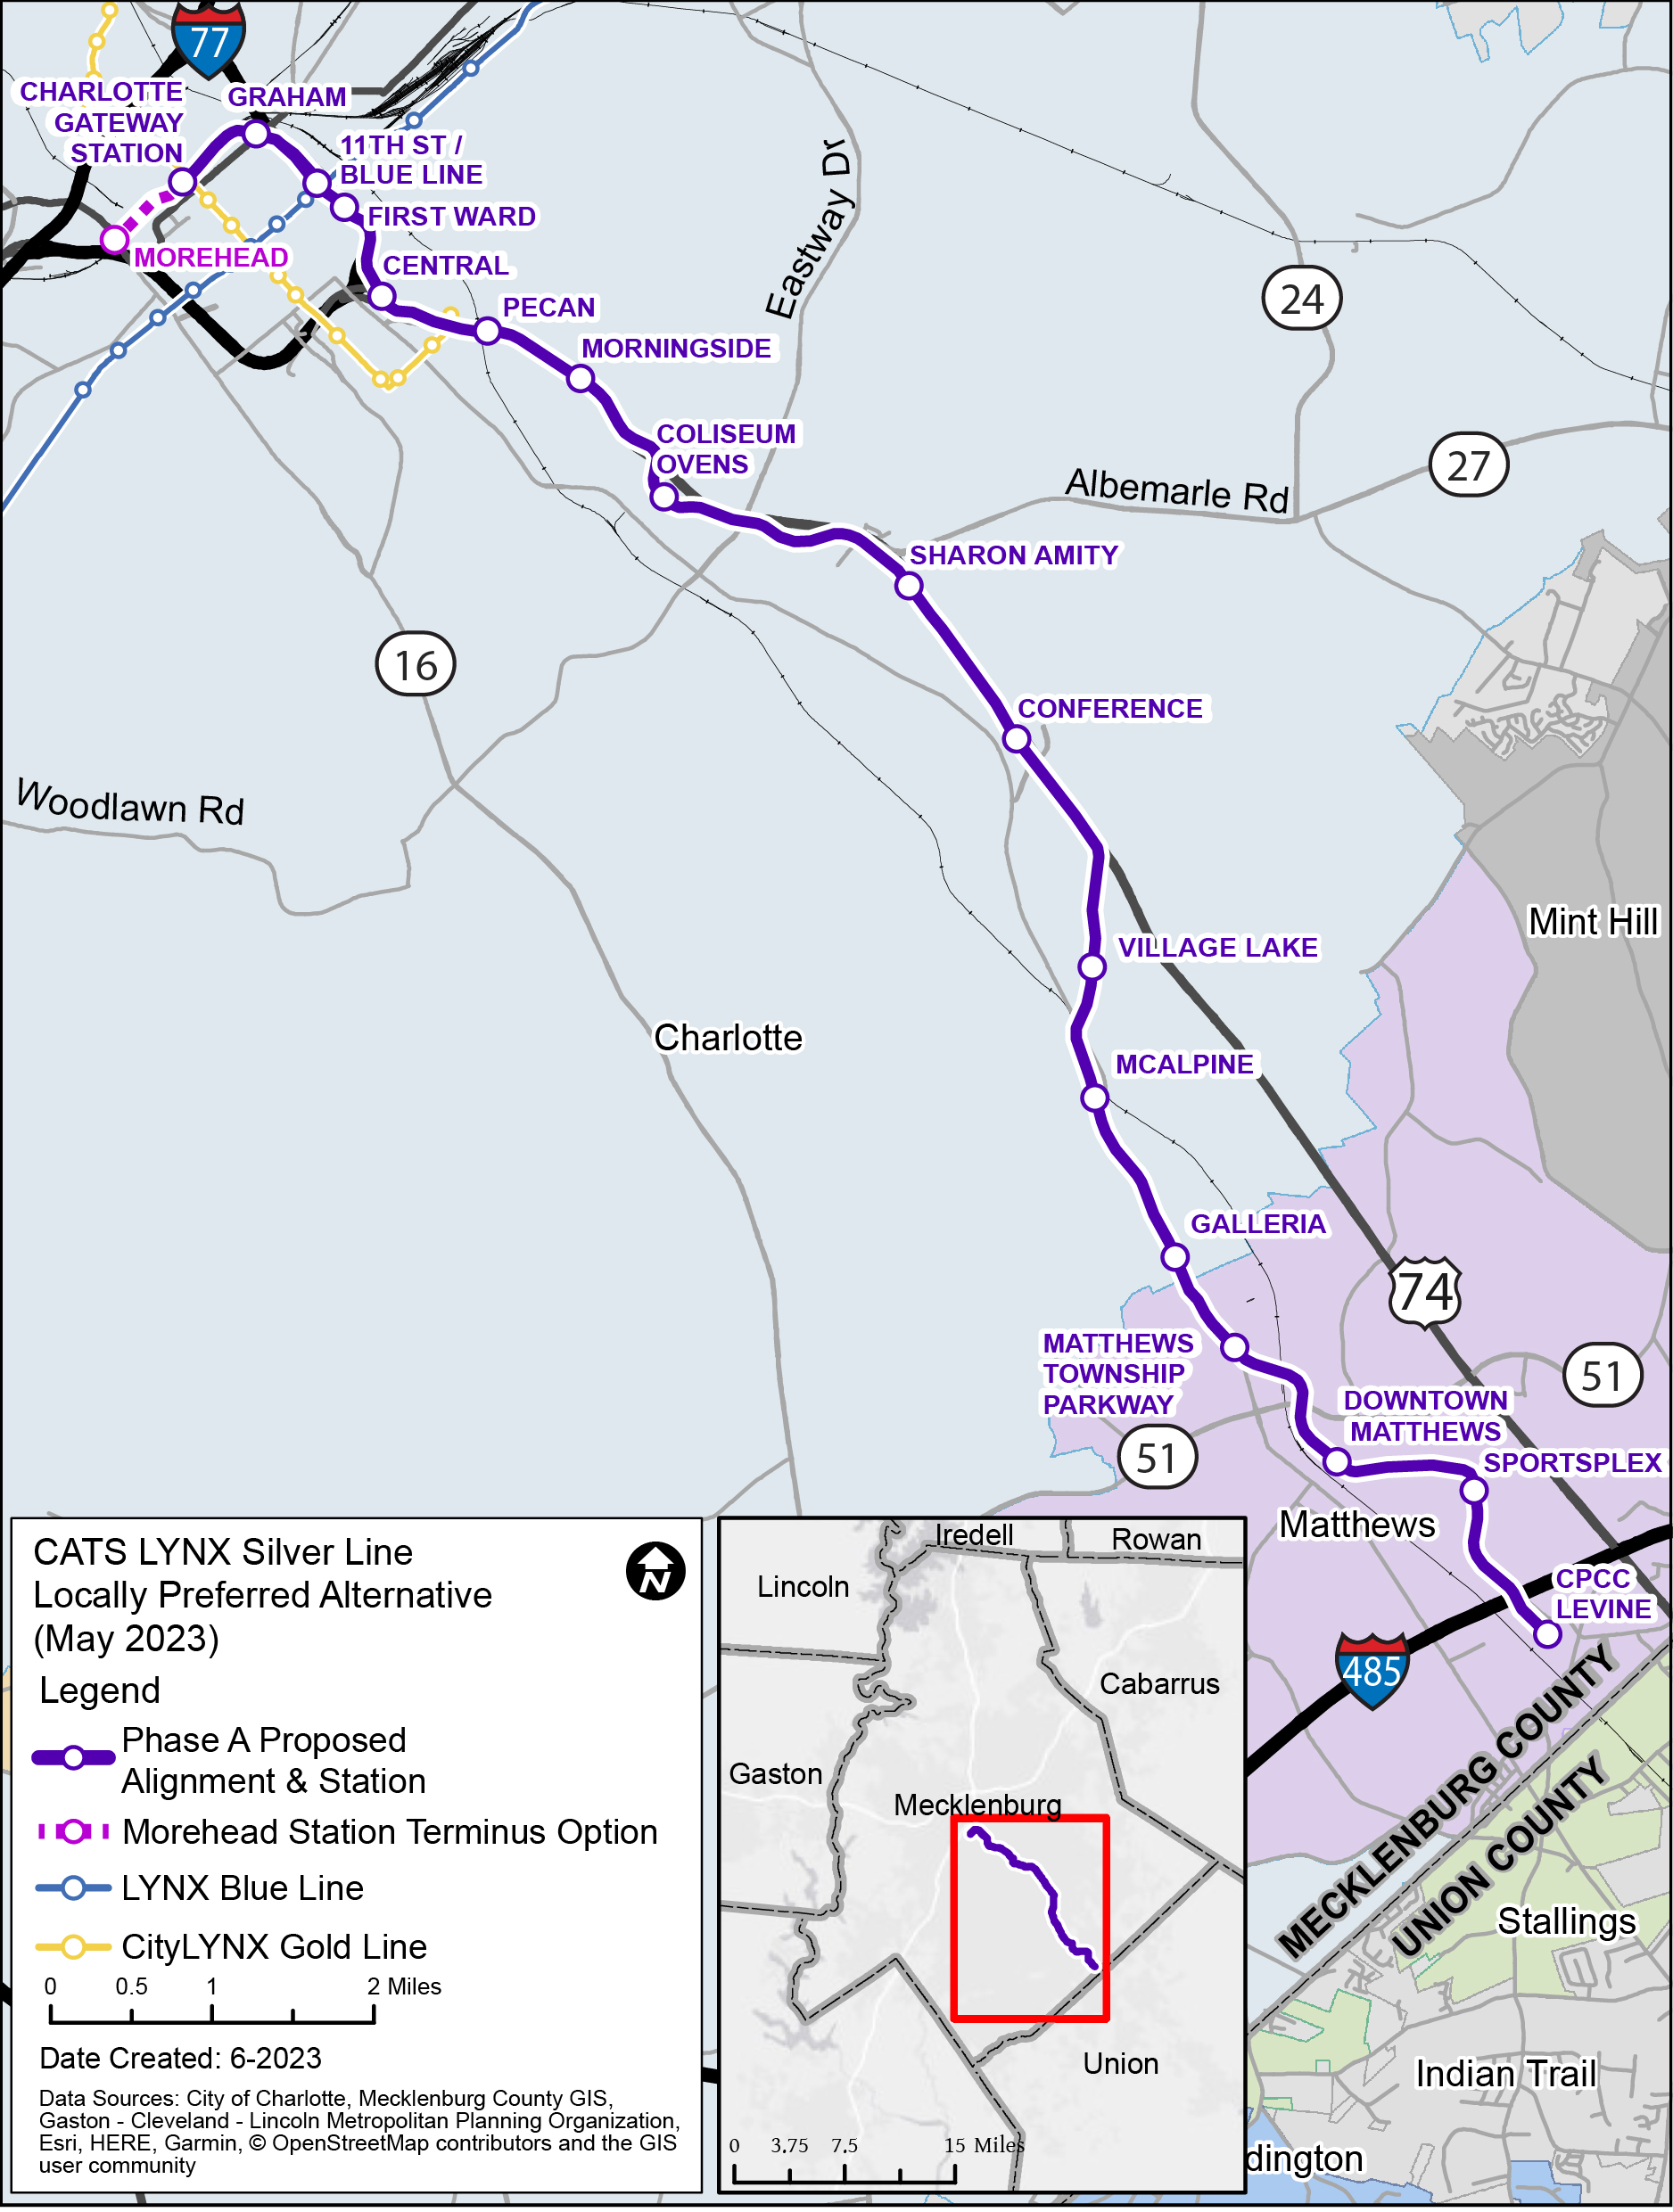 map of Pre Project development from Morehead to Charlotte gateway station